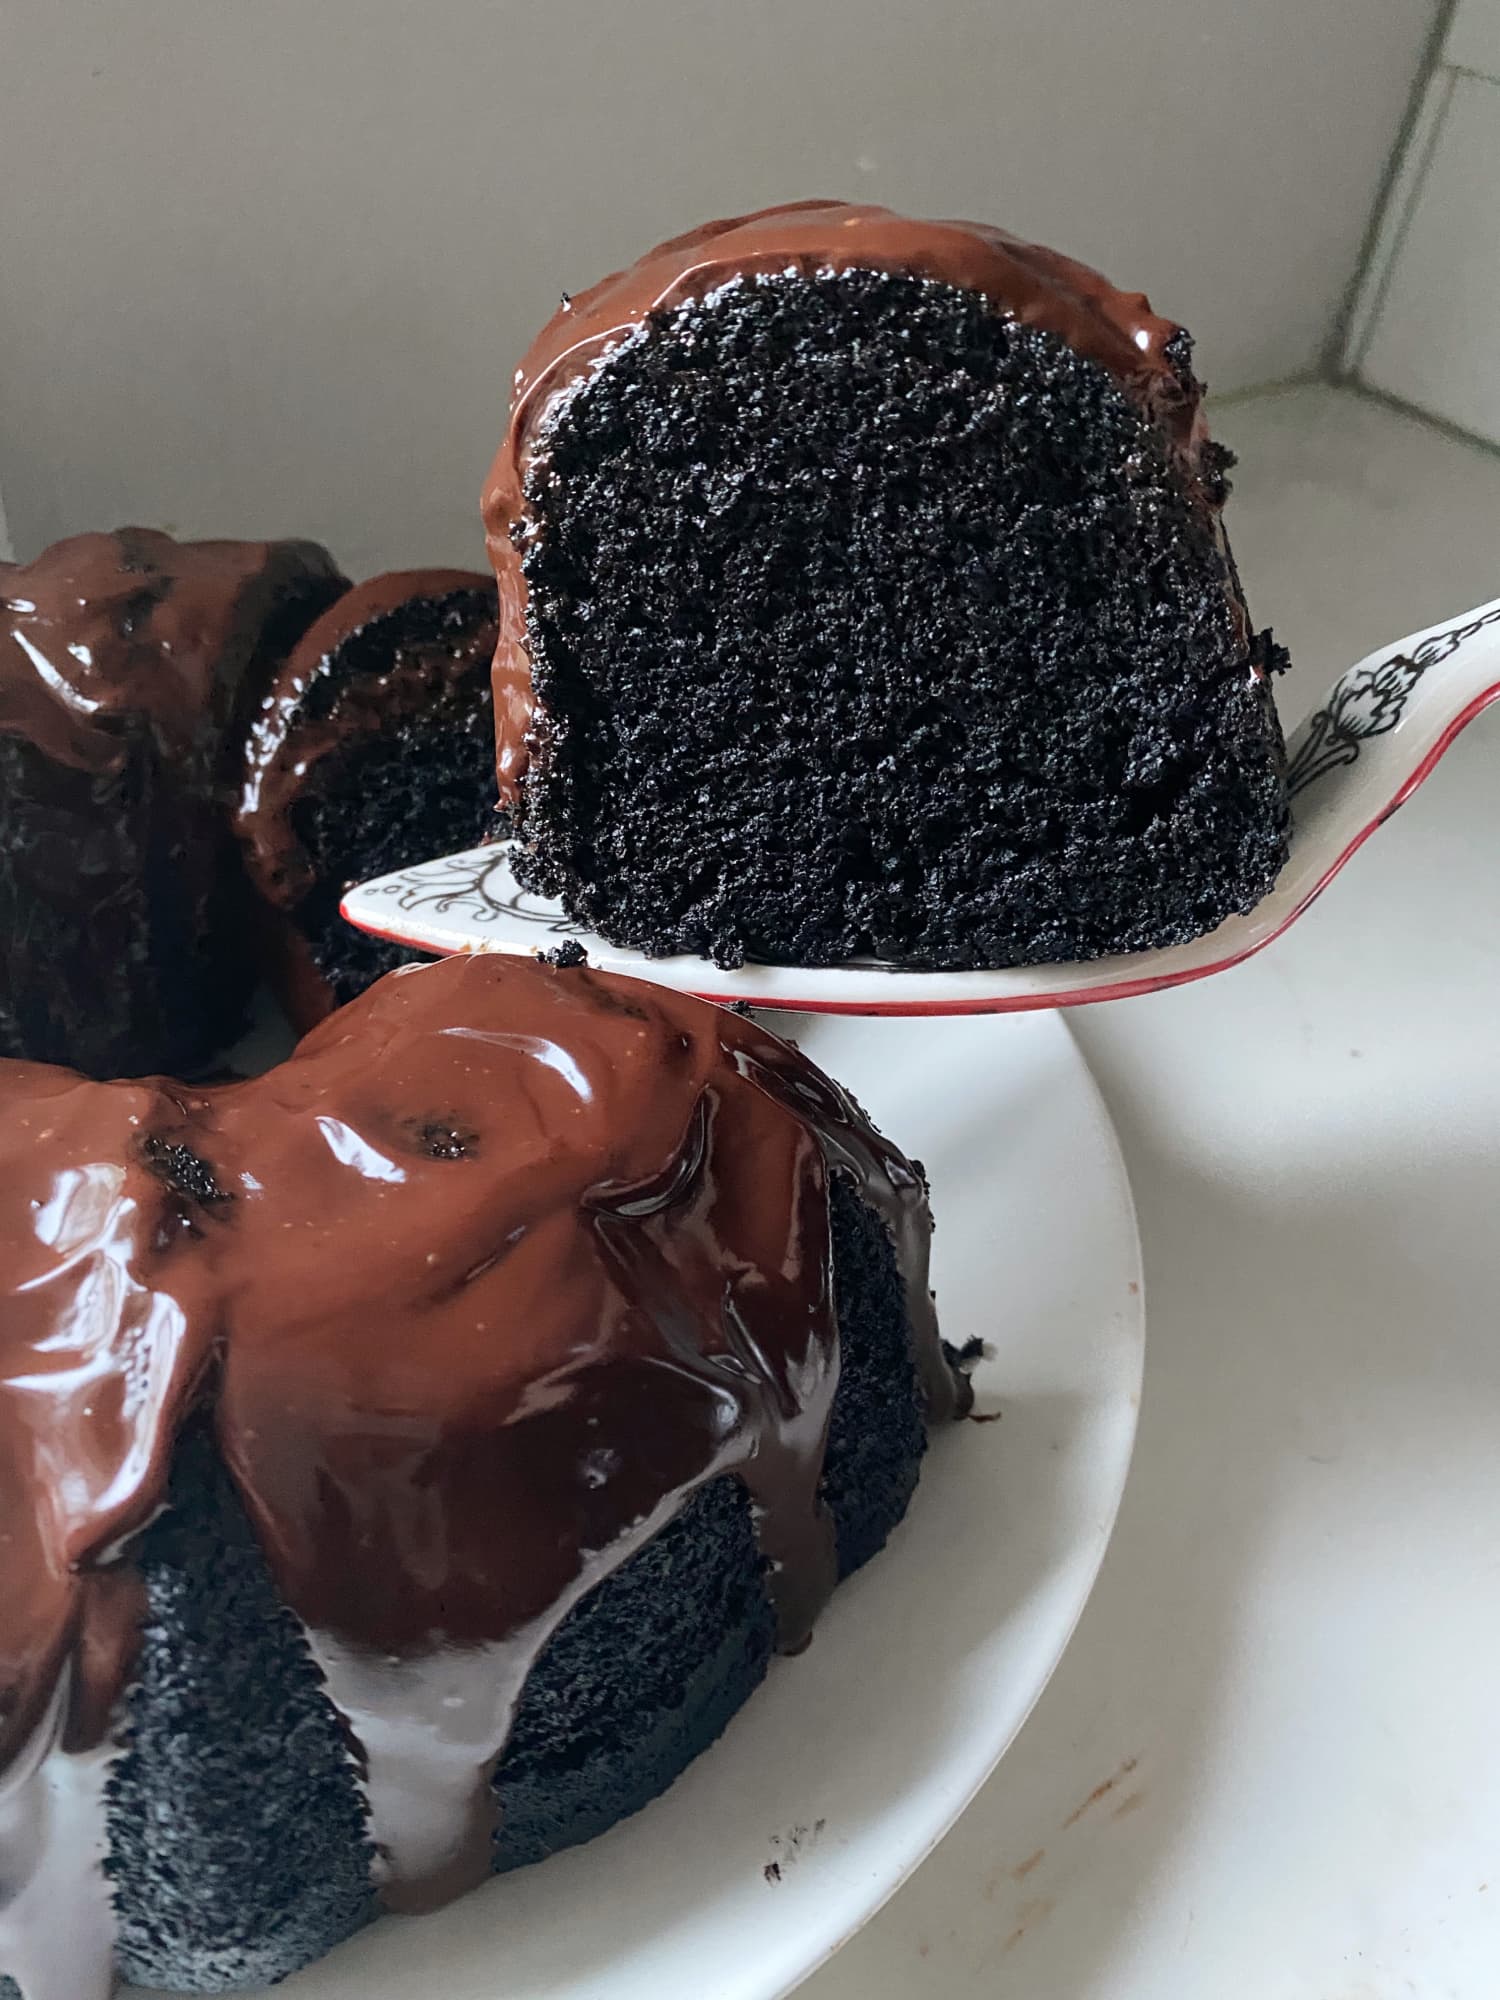 I Tried the Nana’s Devil’s Food Cake Reddit Is Obsessed With (It Honestly Blew Me Away)